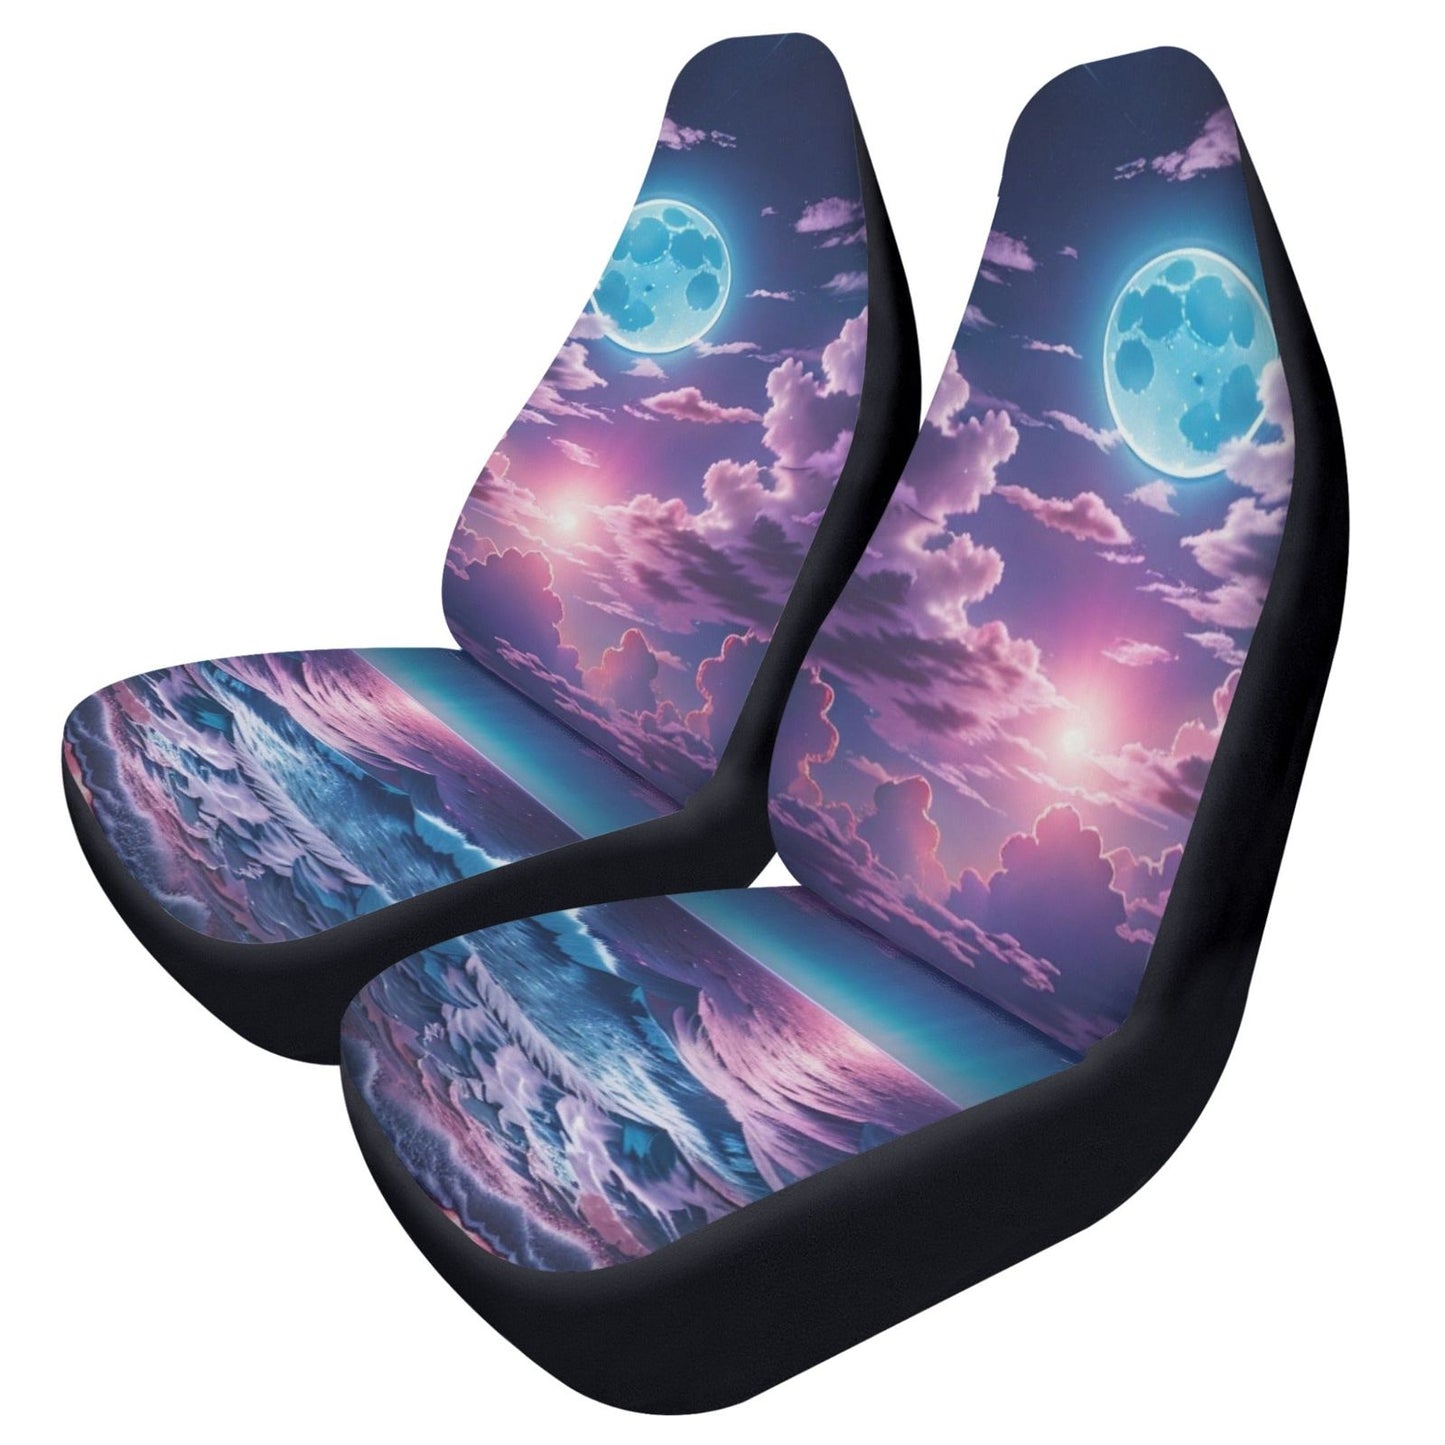 Embroidered Front Car Seat Covers - Iron Phoenix GHG